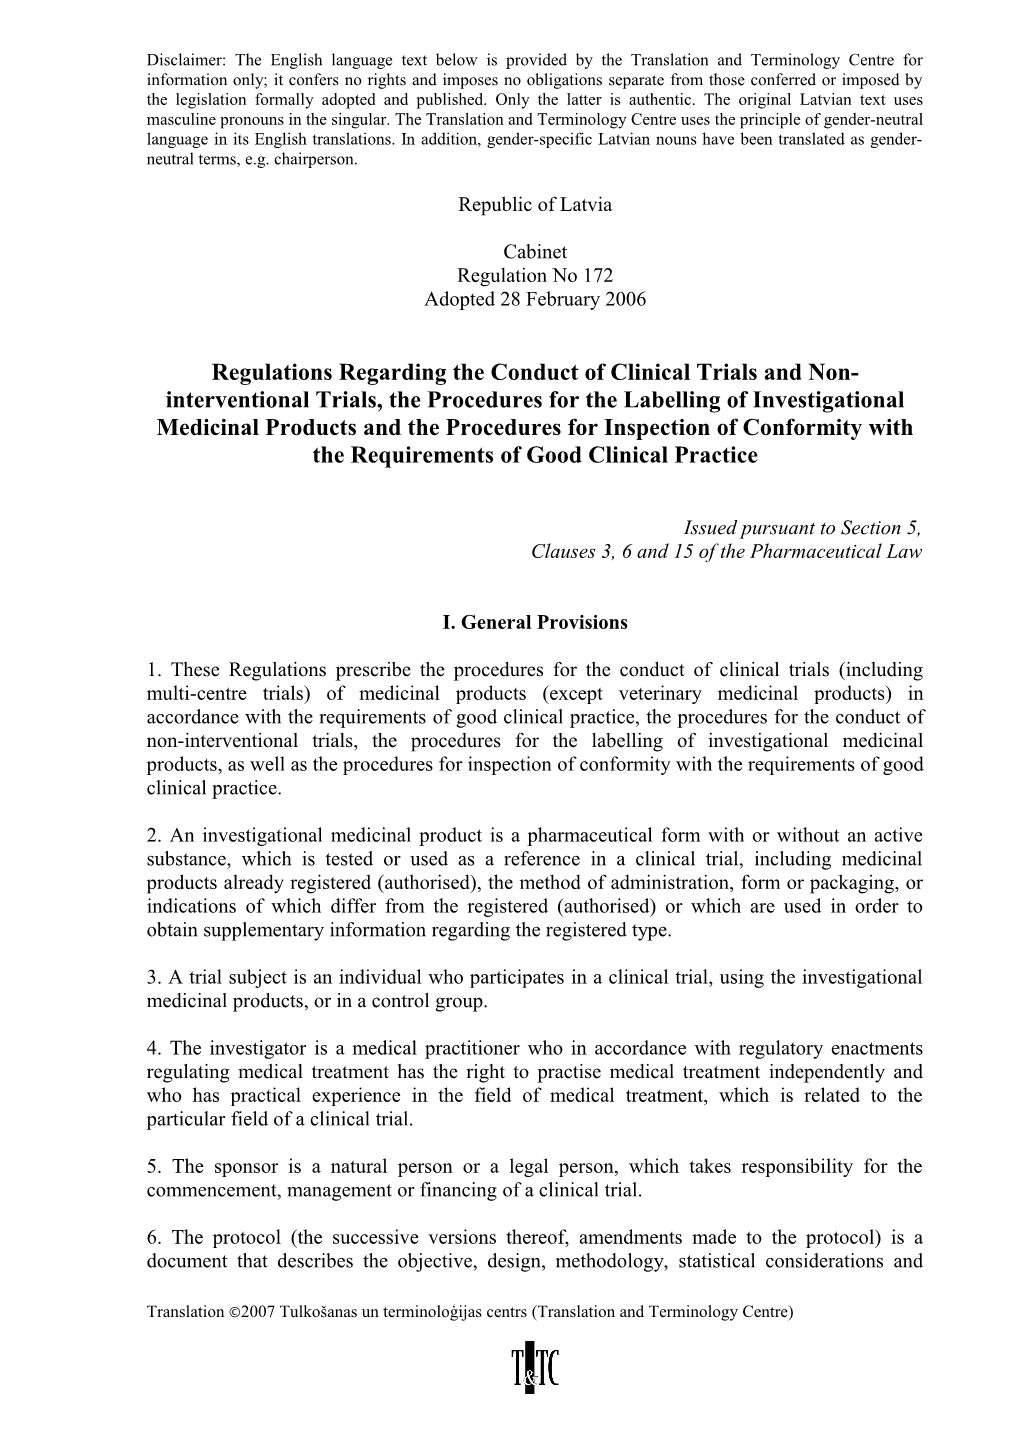 Regulations Regarding the Conduct of Clinical Trials and Non-Interventional Trials, The